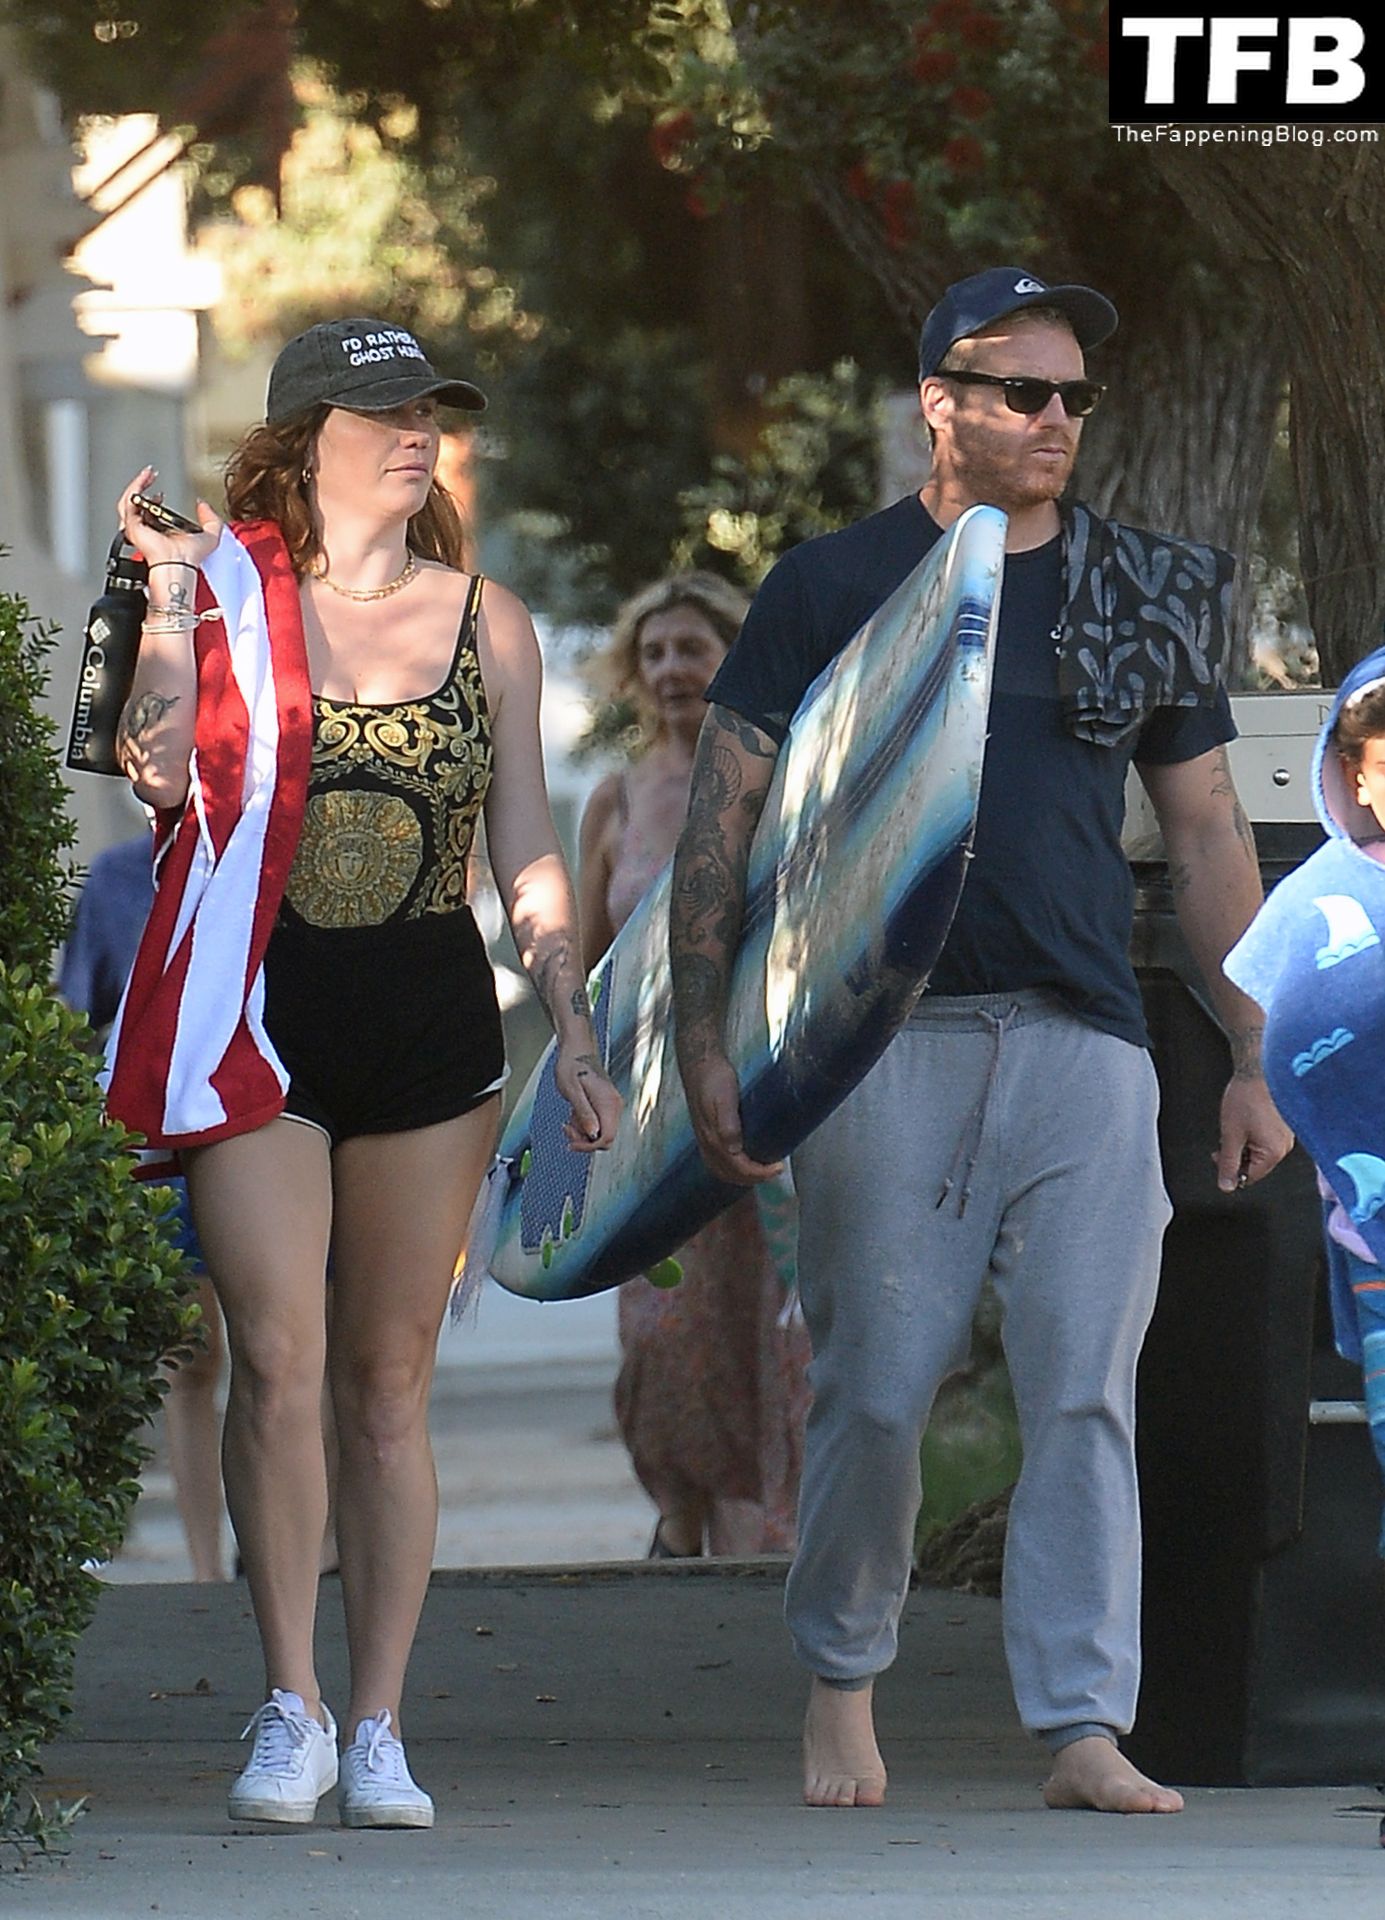 Kesha Sexy The Fappening Blog 5 - Kesha Heads to the Beach with Friends in Los Angeles (30 Photos)